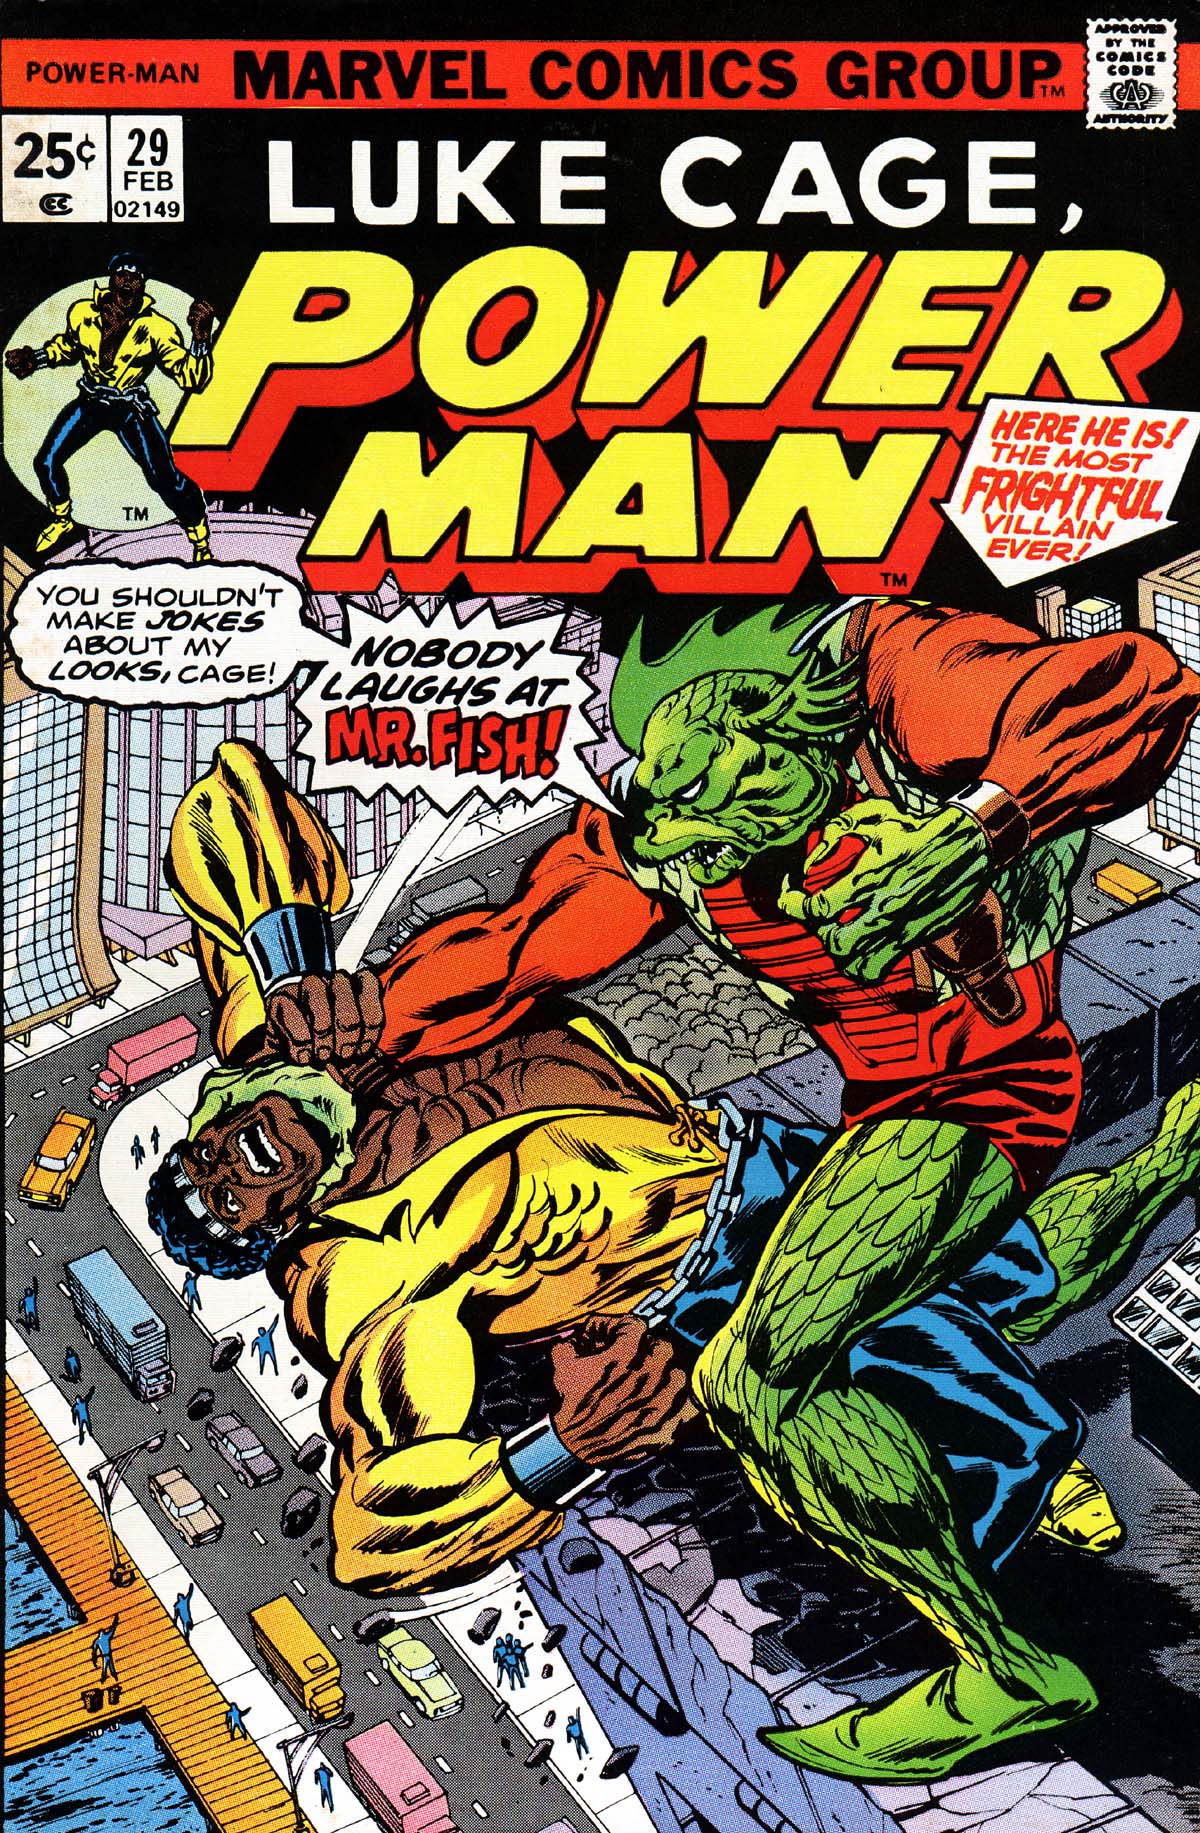 Read online Power Man comic -  Issue #29 - 1